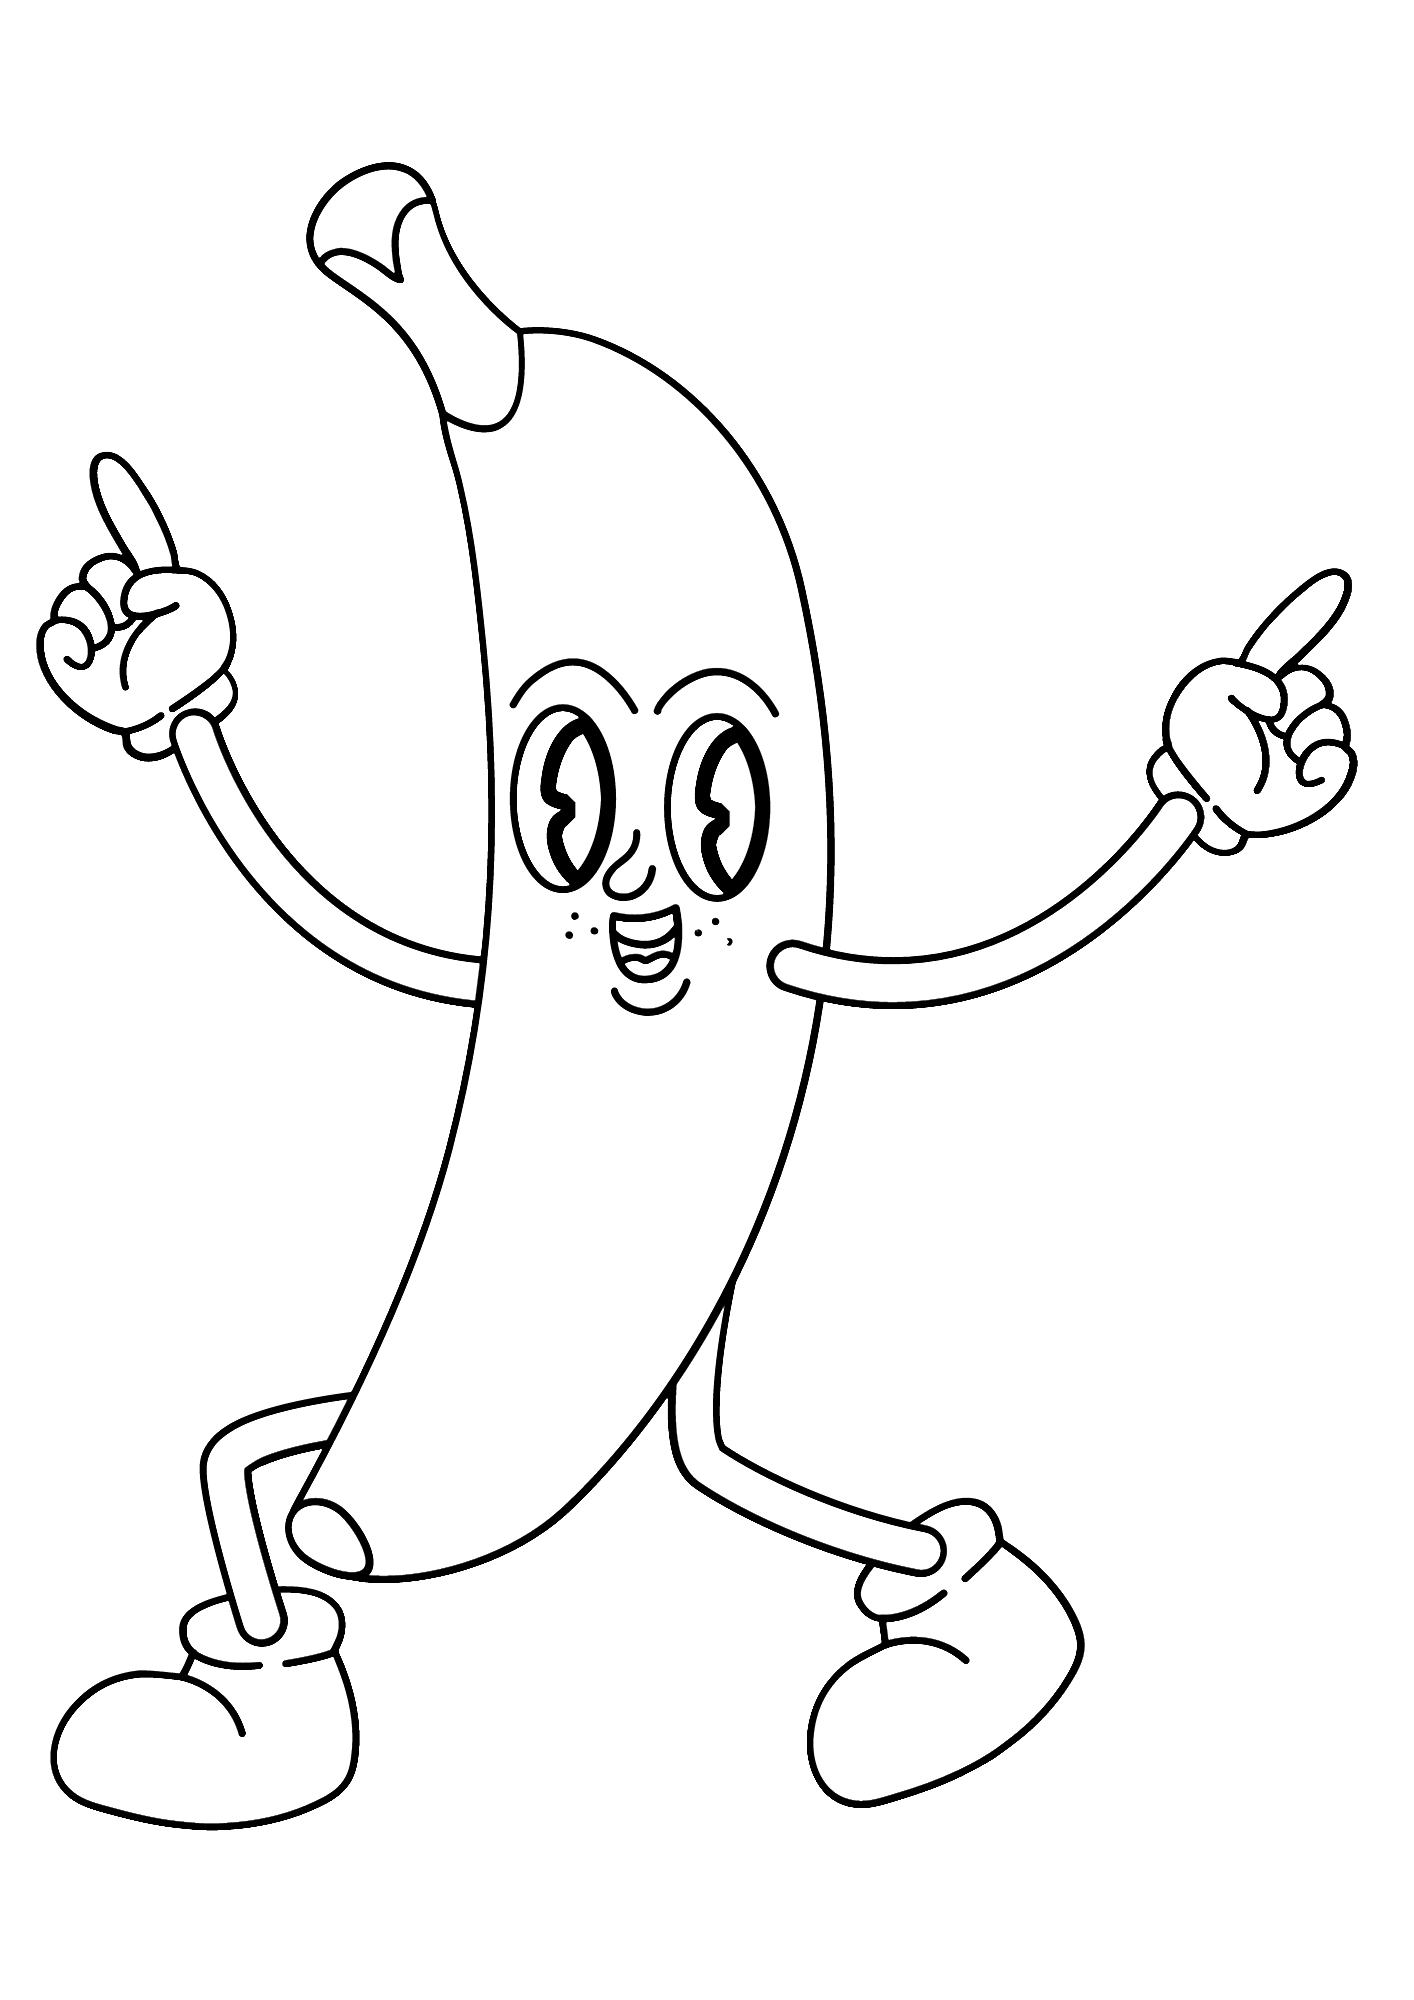 Cool Banana Coloring Pages